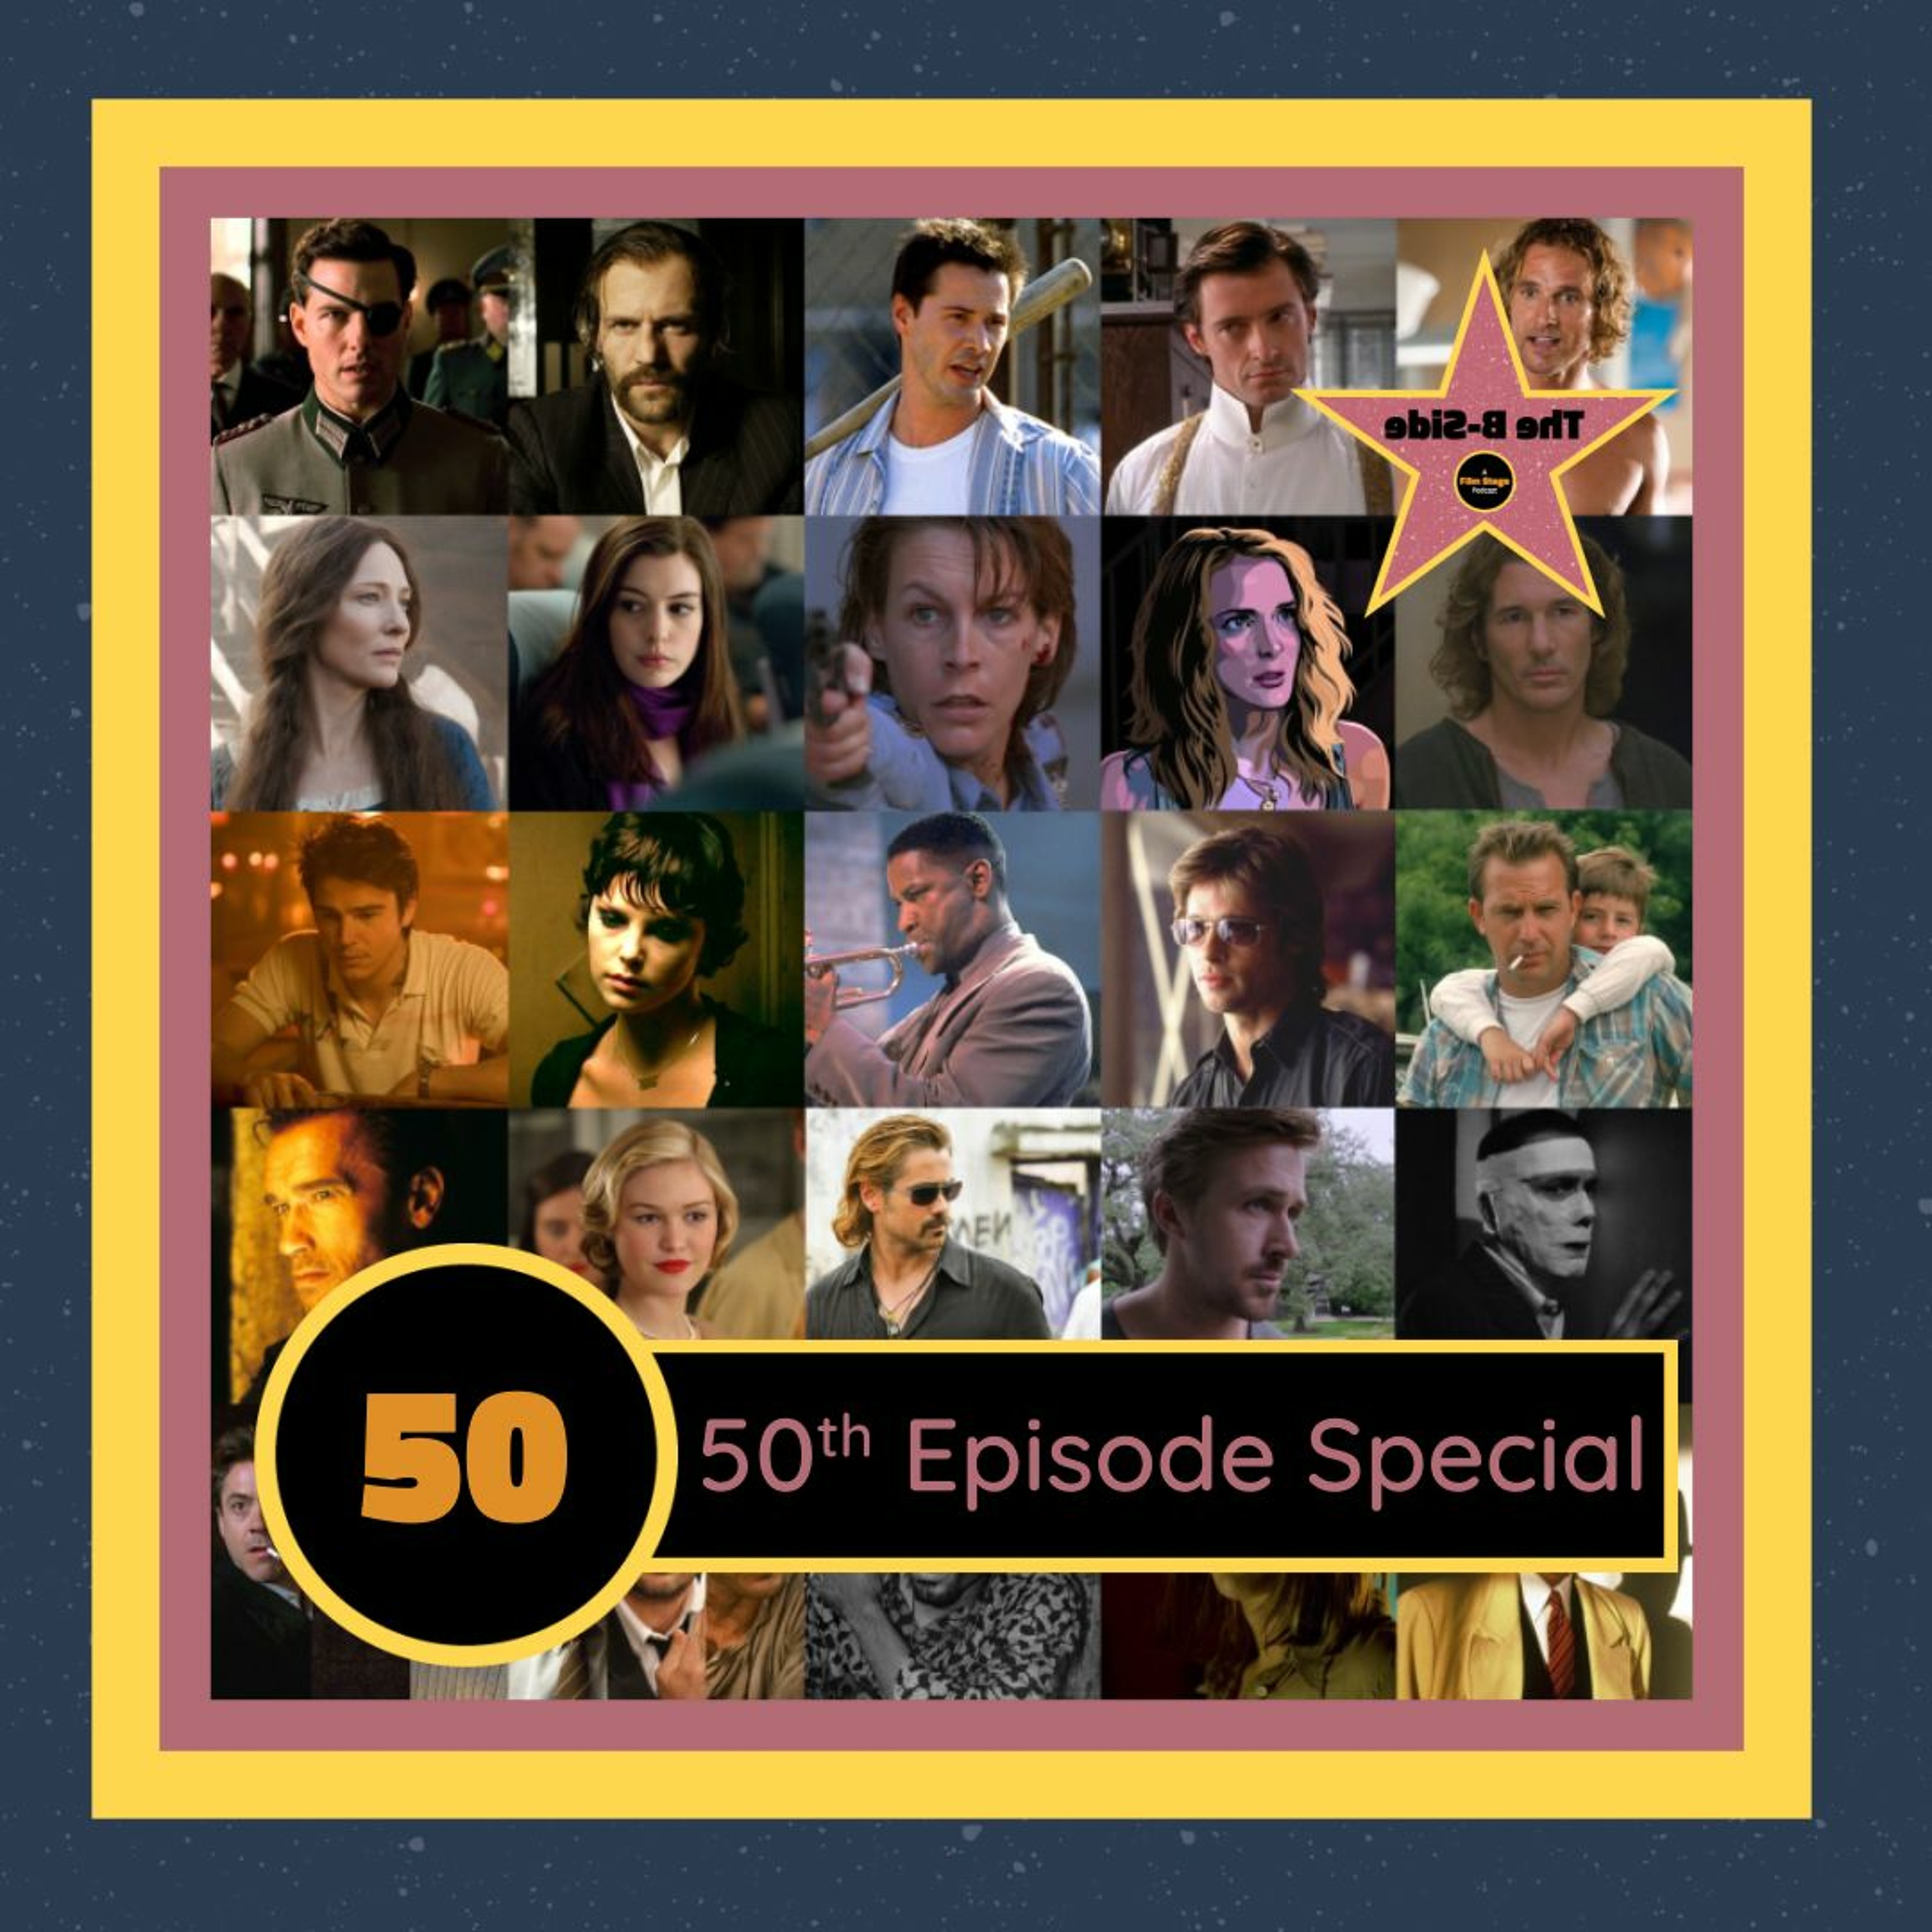 Ep. 50 – 50th Episode Special